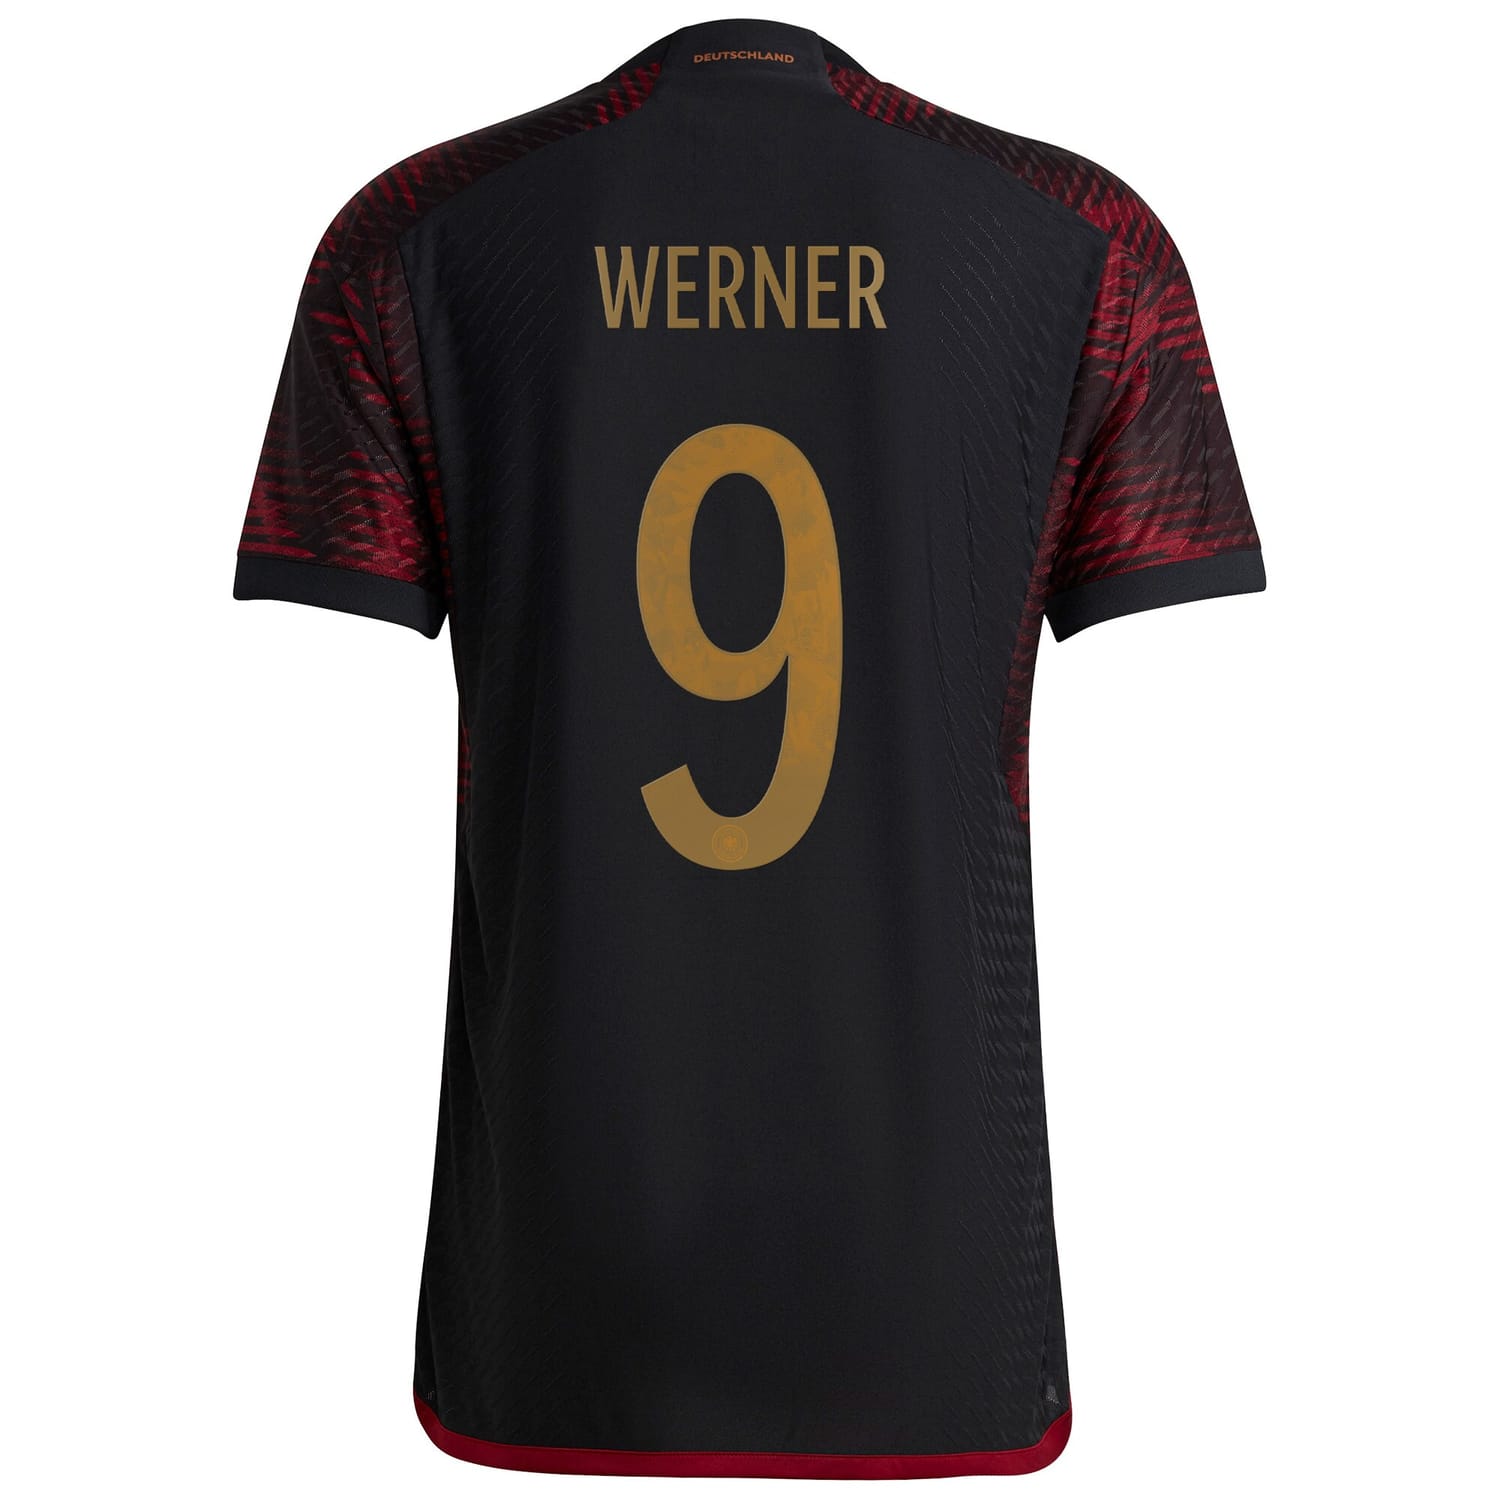 Germany National Team Away Authentic Jersey Shirt Black 2022-23 player Timo Werner printing for Men